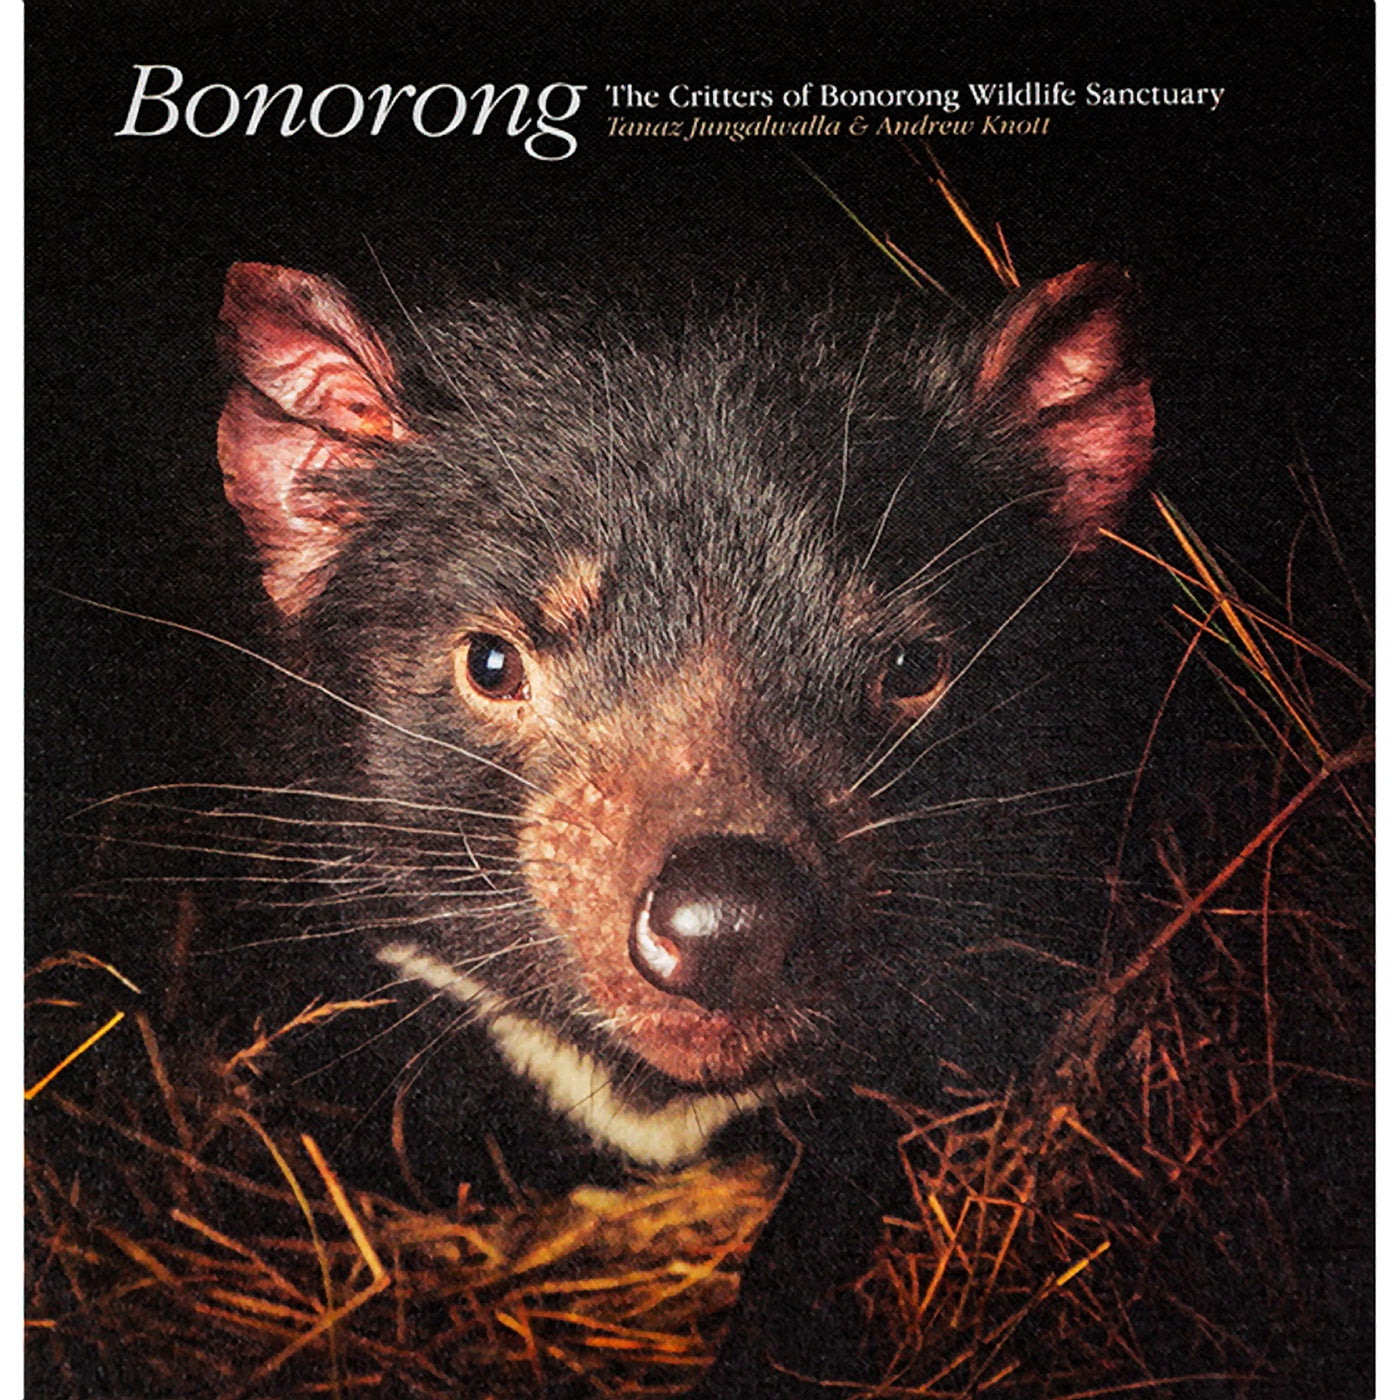 Bonorong - The Critters of Bonorong Wildlife Sanctuary